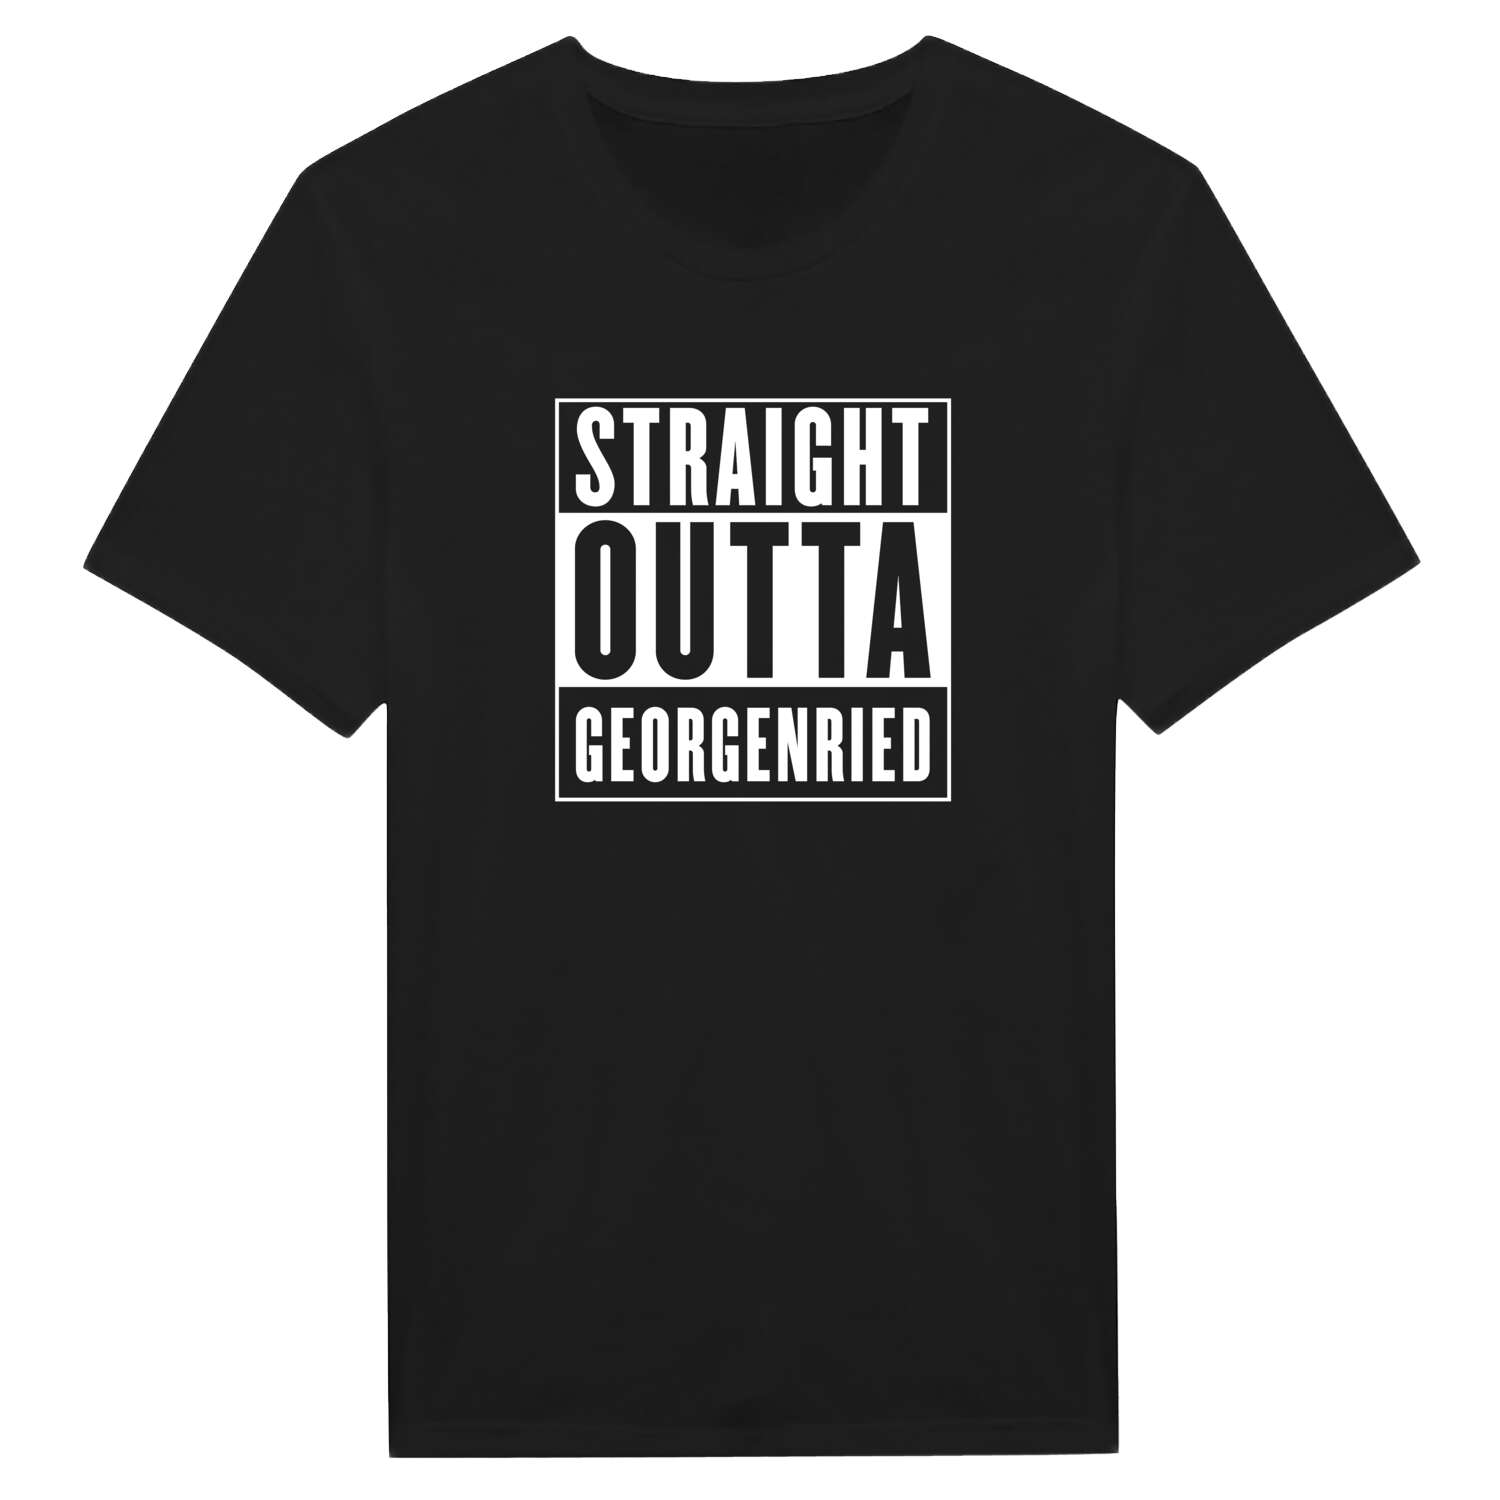 Georgenried T-Shirt »Straight Outta«